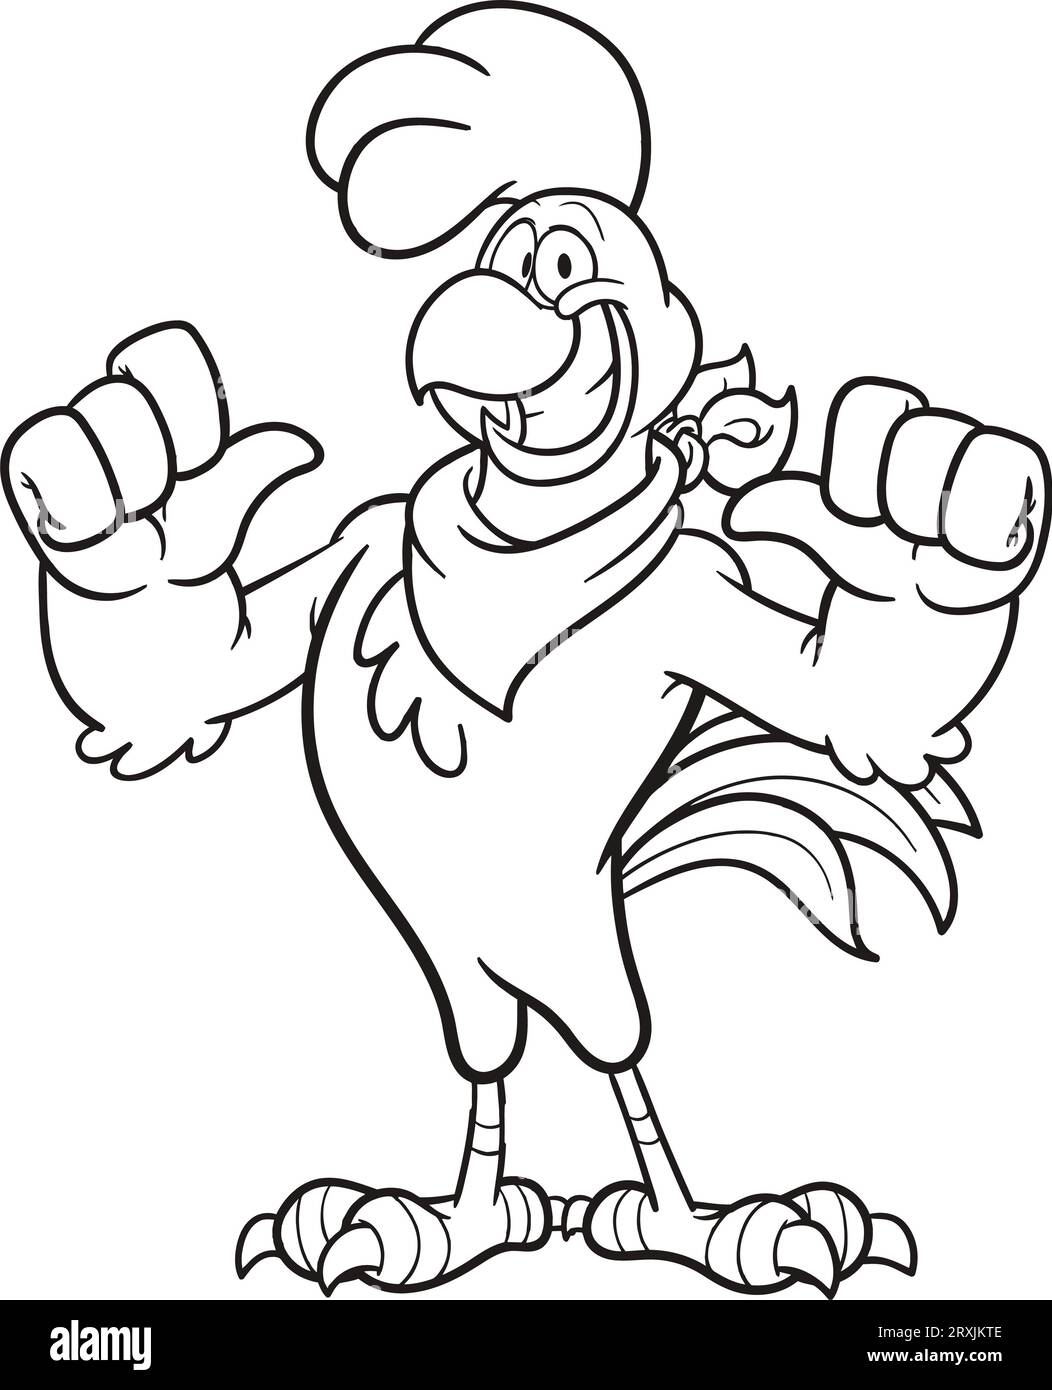 Cute cartoon rooster coloring page for kids Stock Photo